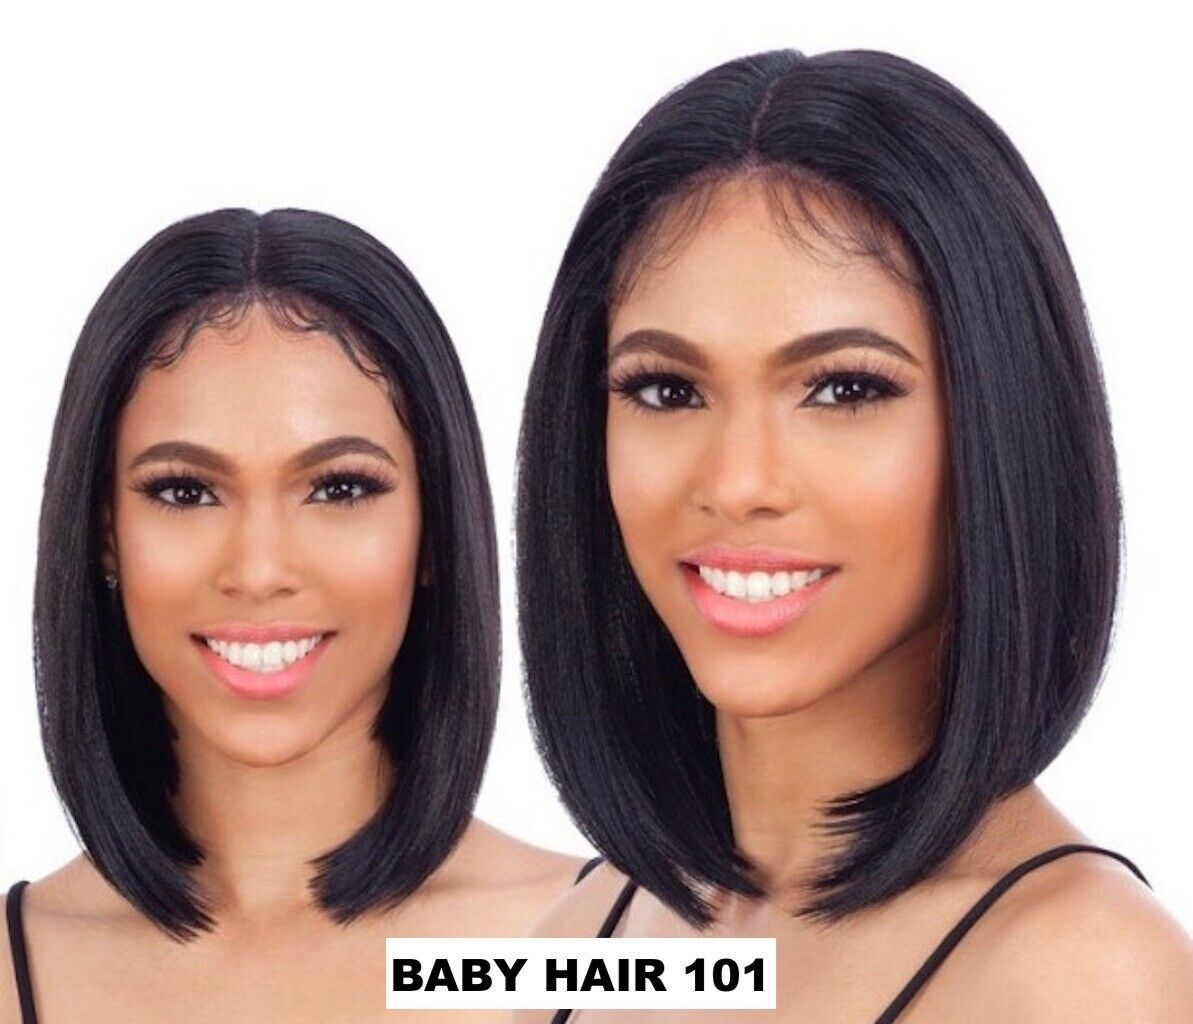 SHAKE N GO FREETRESS EQUAL BABY HAIR LACE FRONT SYNTHETIC WIG 'BABY HAIR 101' - $29.99